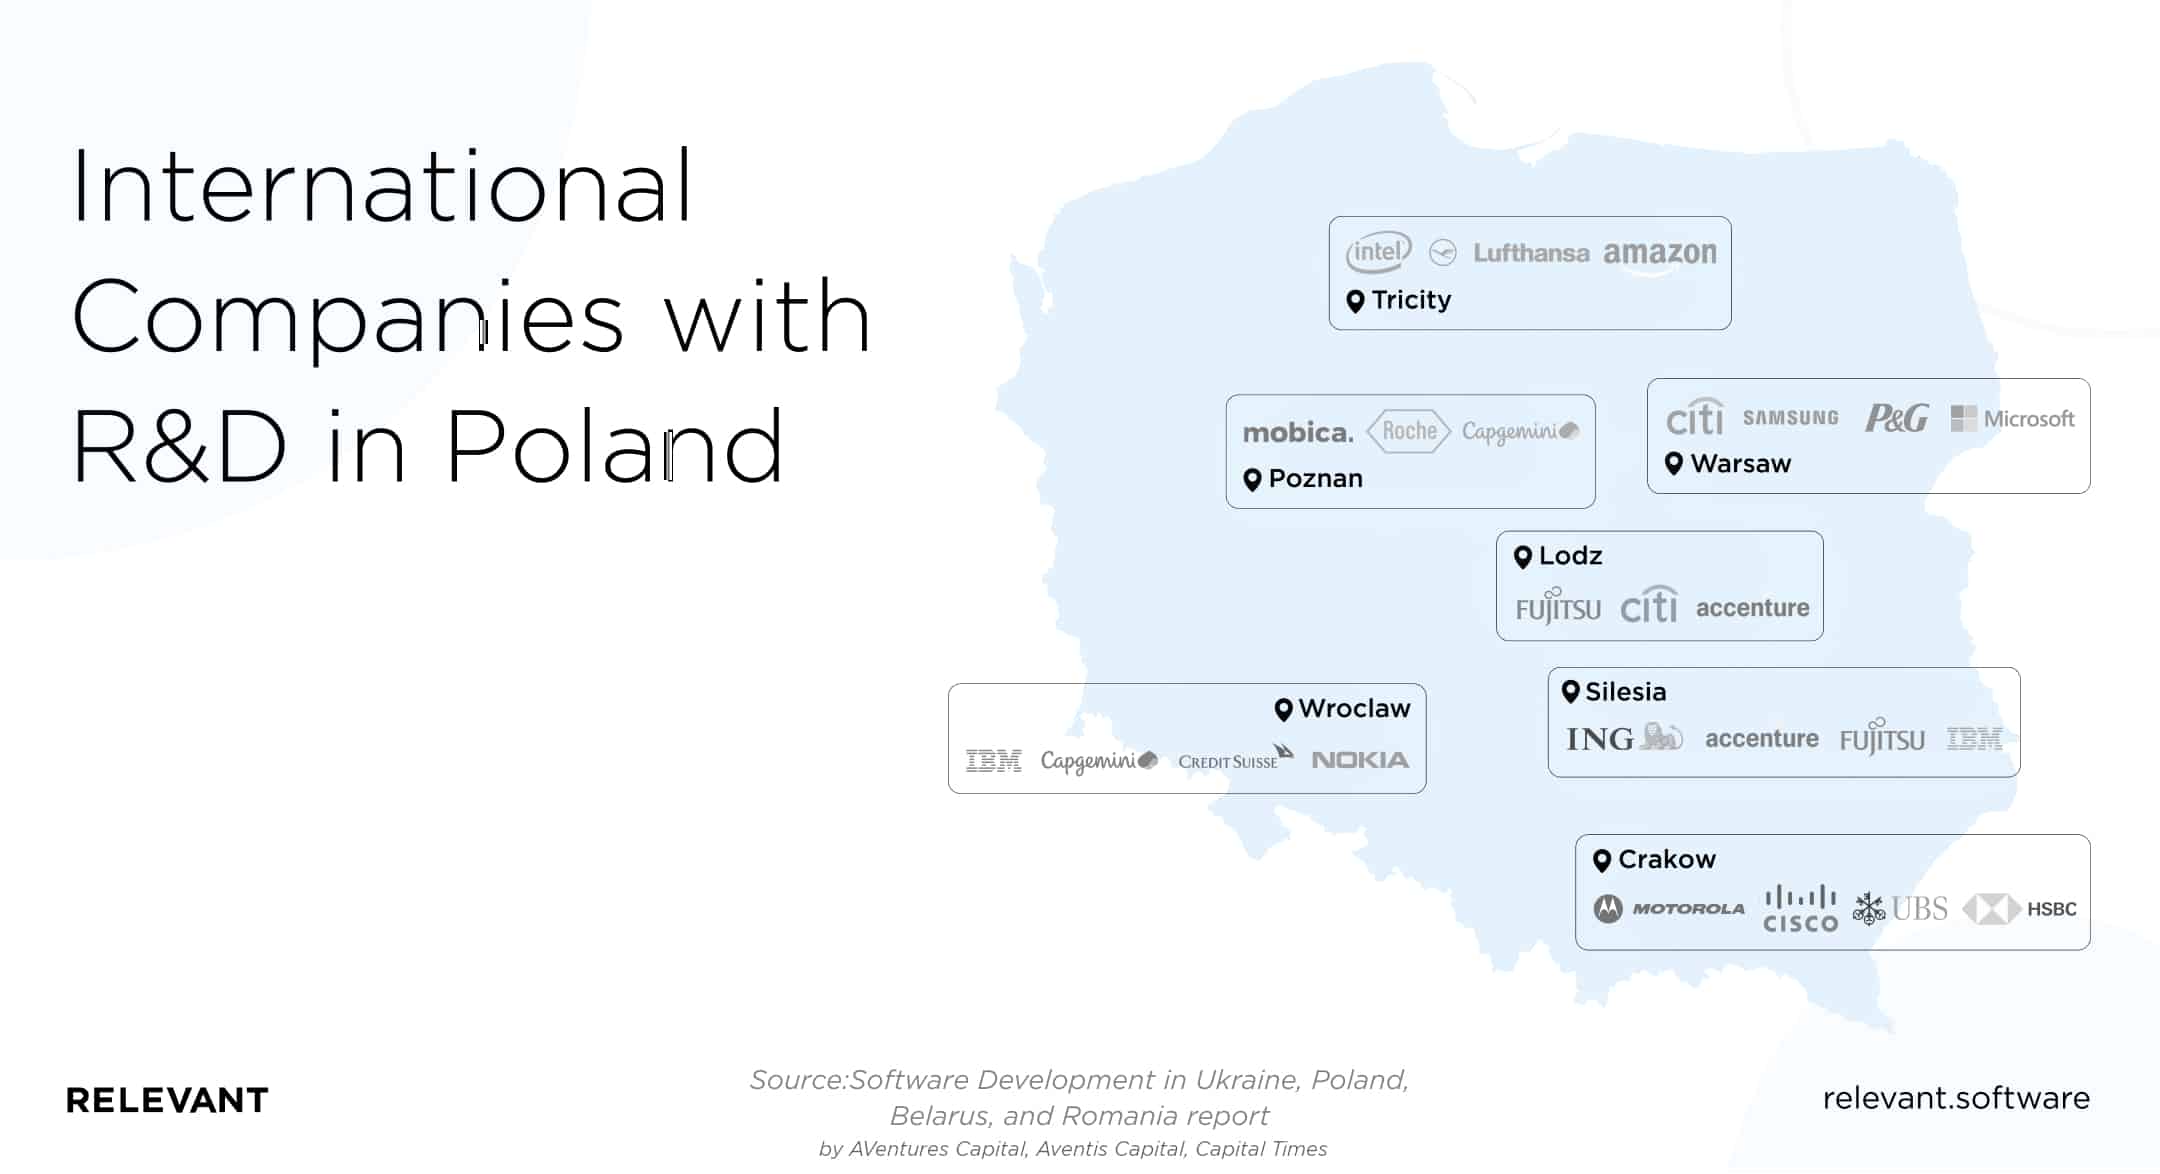 International companies with R&D in Poland